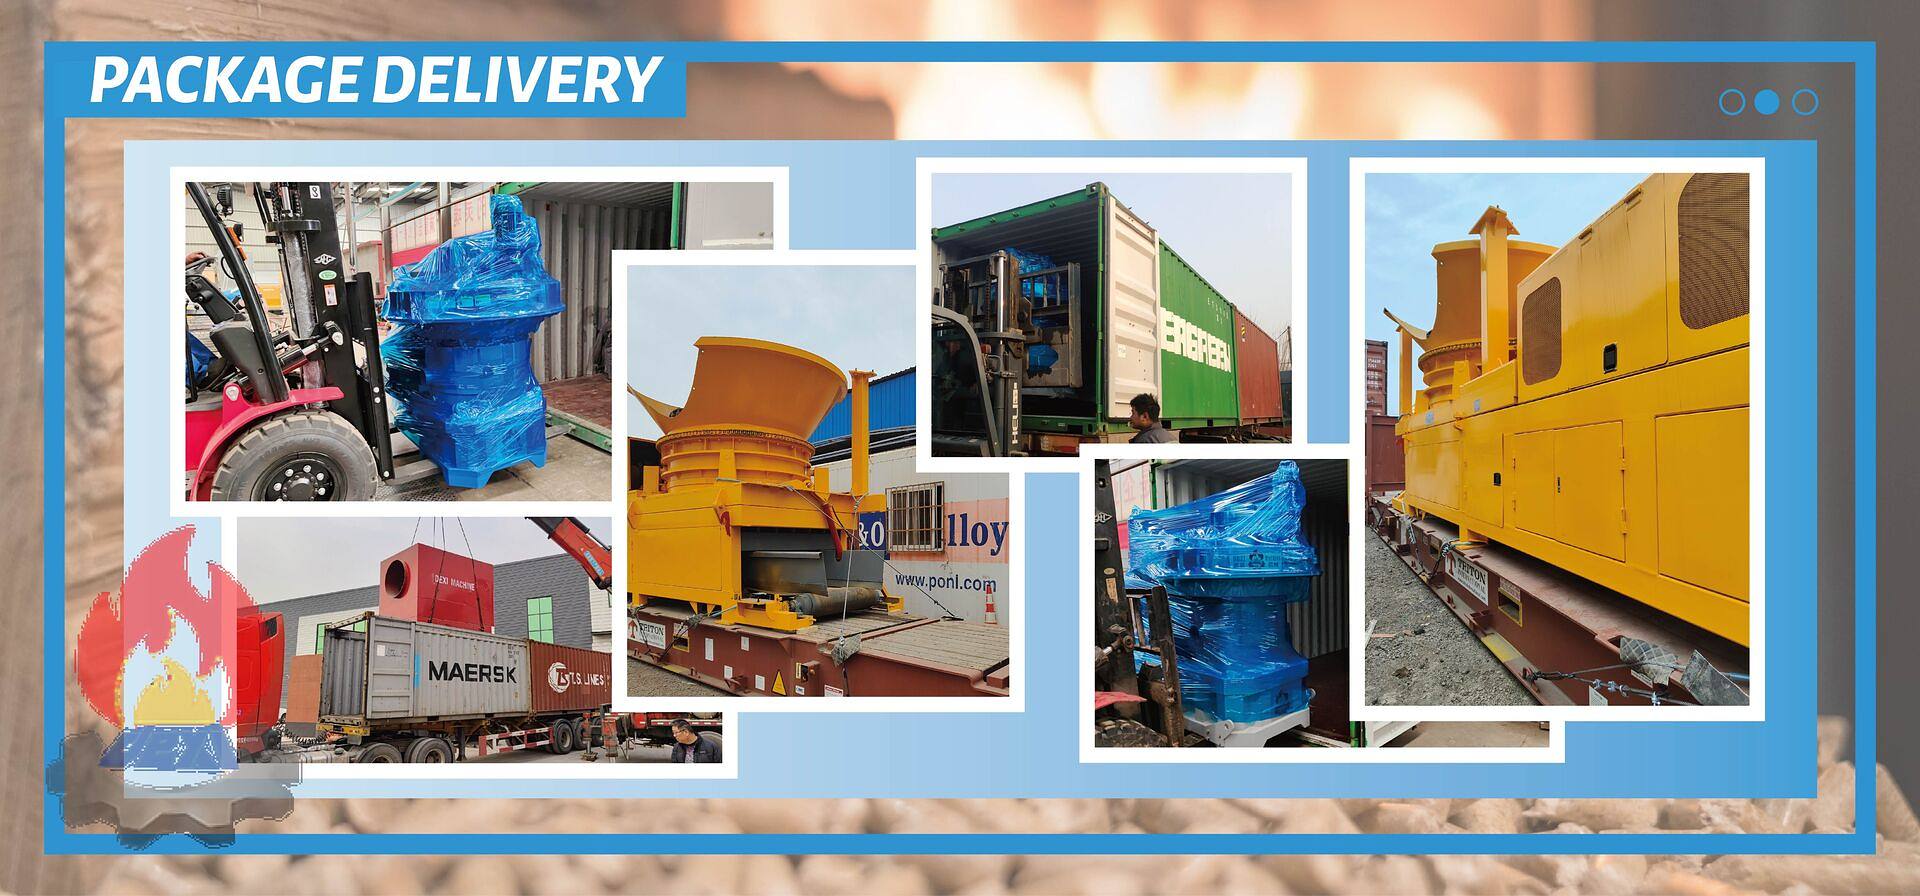 Packing & delivery for wood pellet making machine.jpg